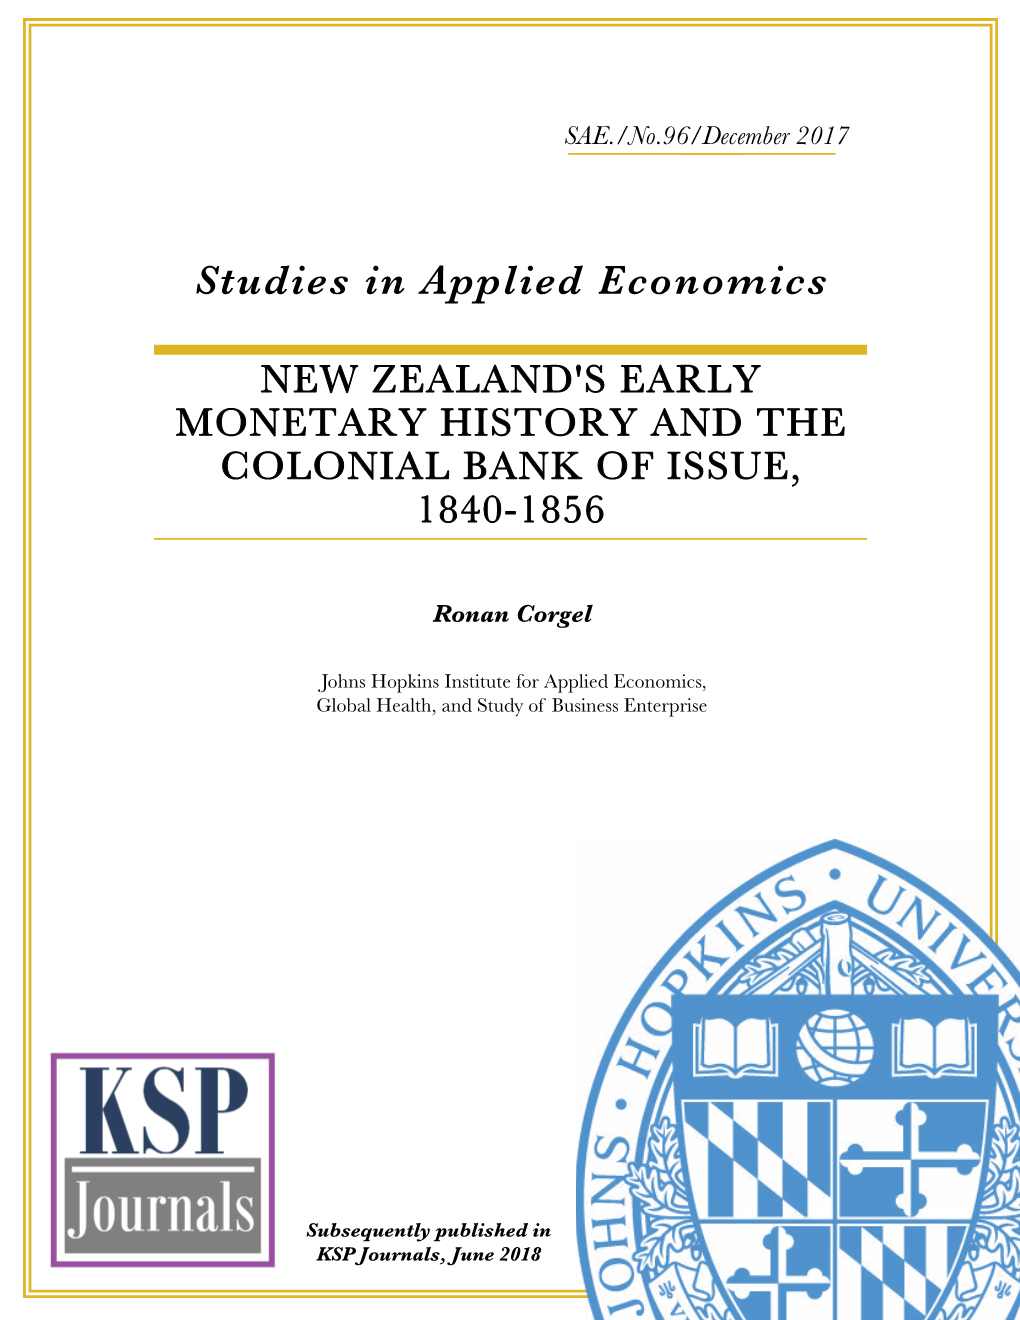 New Zealand's Early Monetary History and the Colonial Bank of Issue, 1840-1856